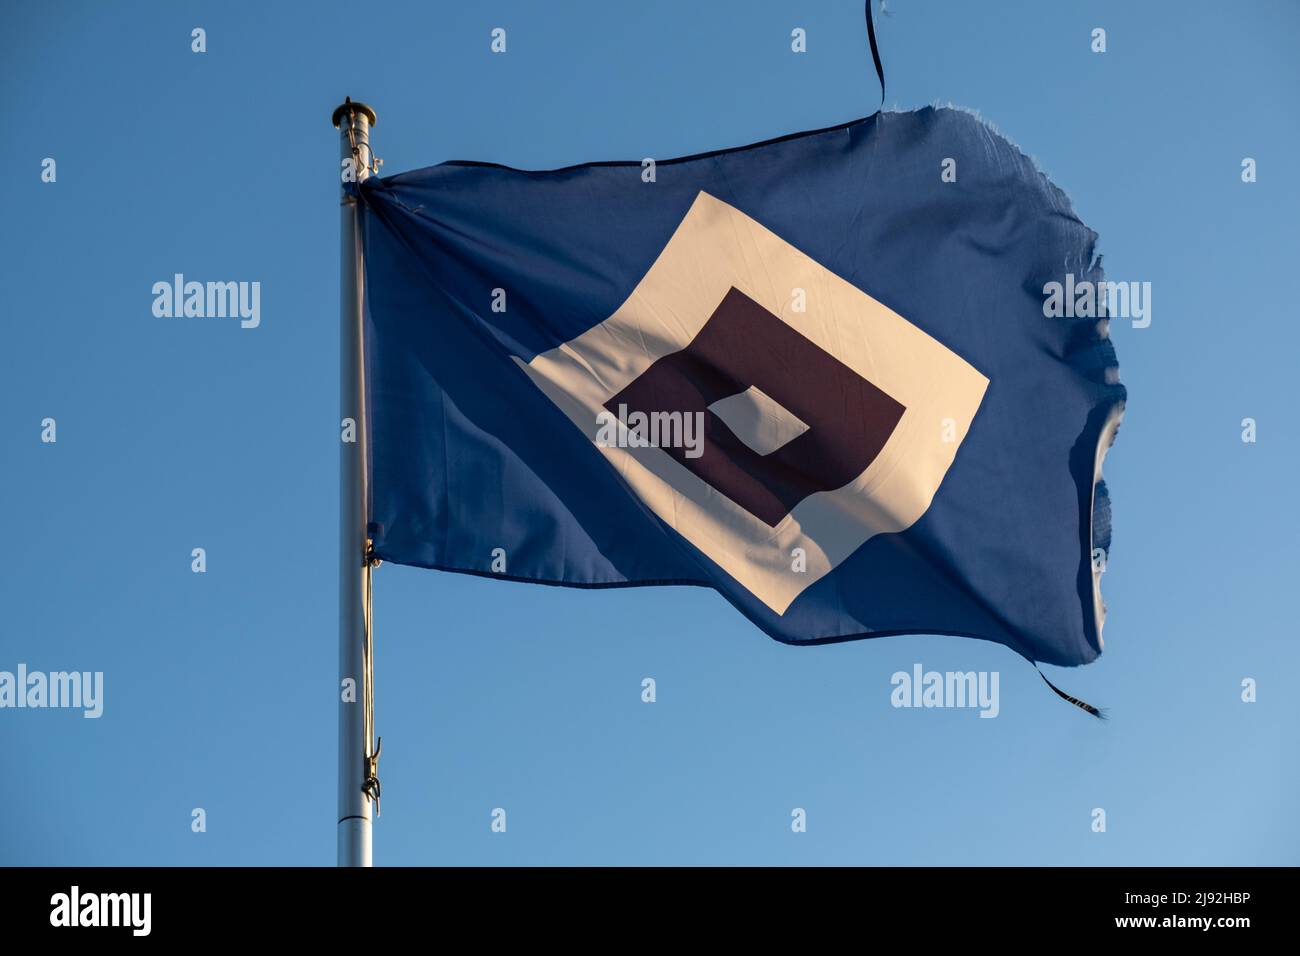 13.03.2022, Heidenau, Lower Saxony, Germany - Flag with logo of the second division soccer club HSV. 00A220313D549CAROEX.JPG [MODEL RELEASE: NOT APPLI Stock Photo